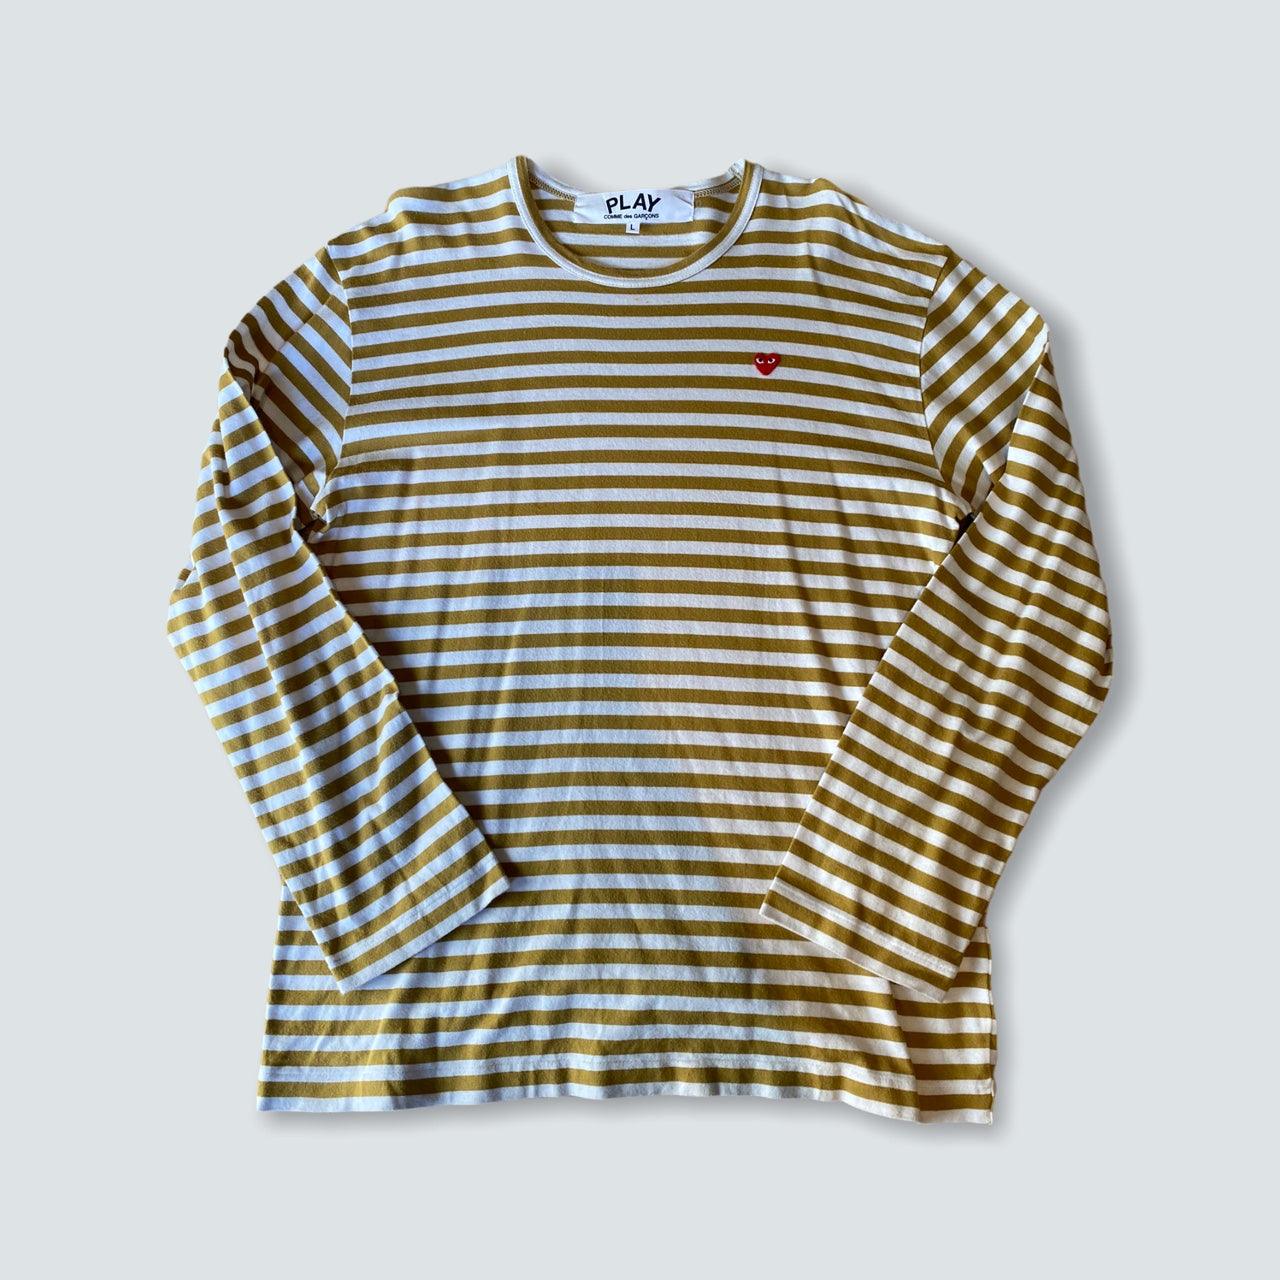 Play Comme des Garçons Gold and white long sleeve t-shirt (L) - Known Source